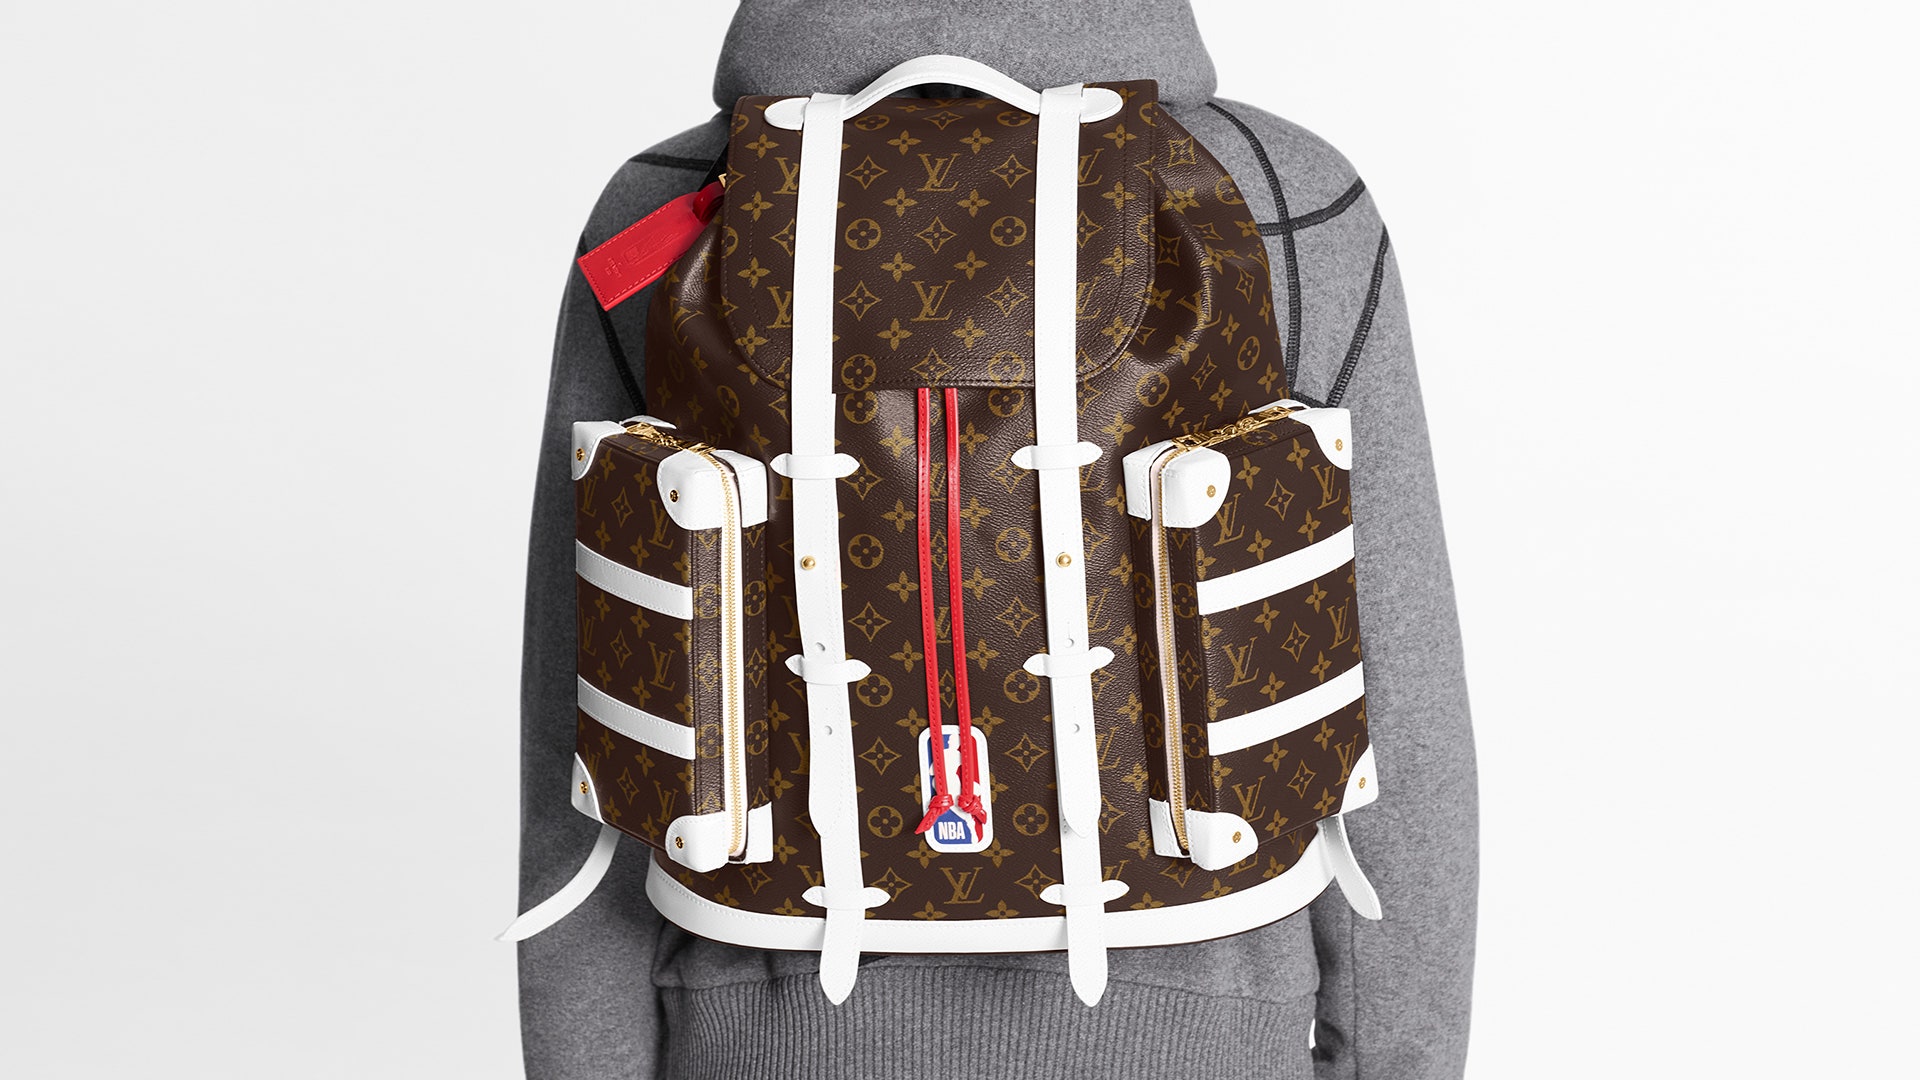 Channel LeBron James with the Louis Vuitton x NBA collection - www.bagssaleusa.com